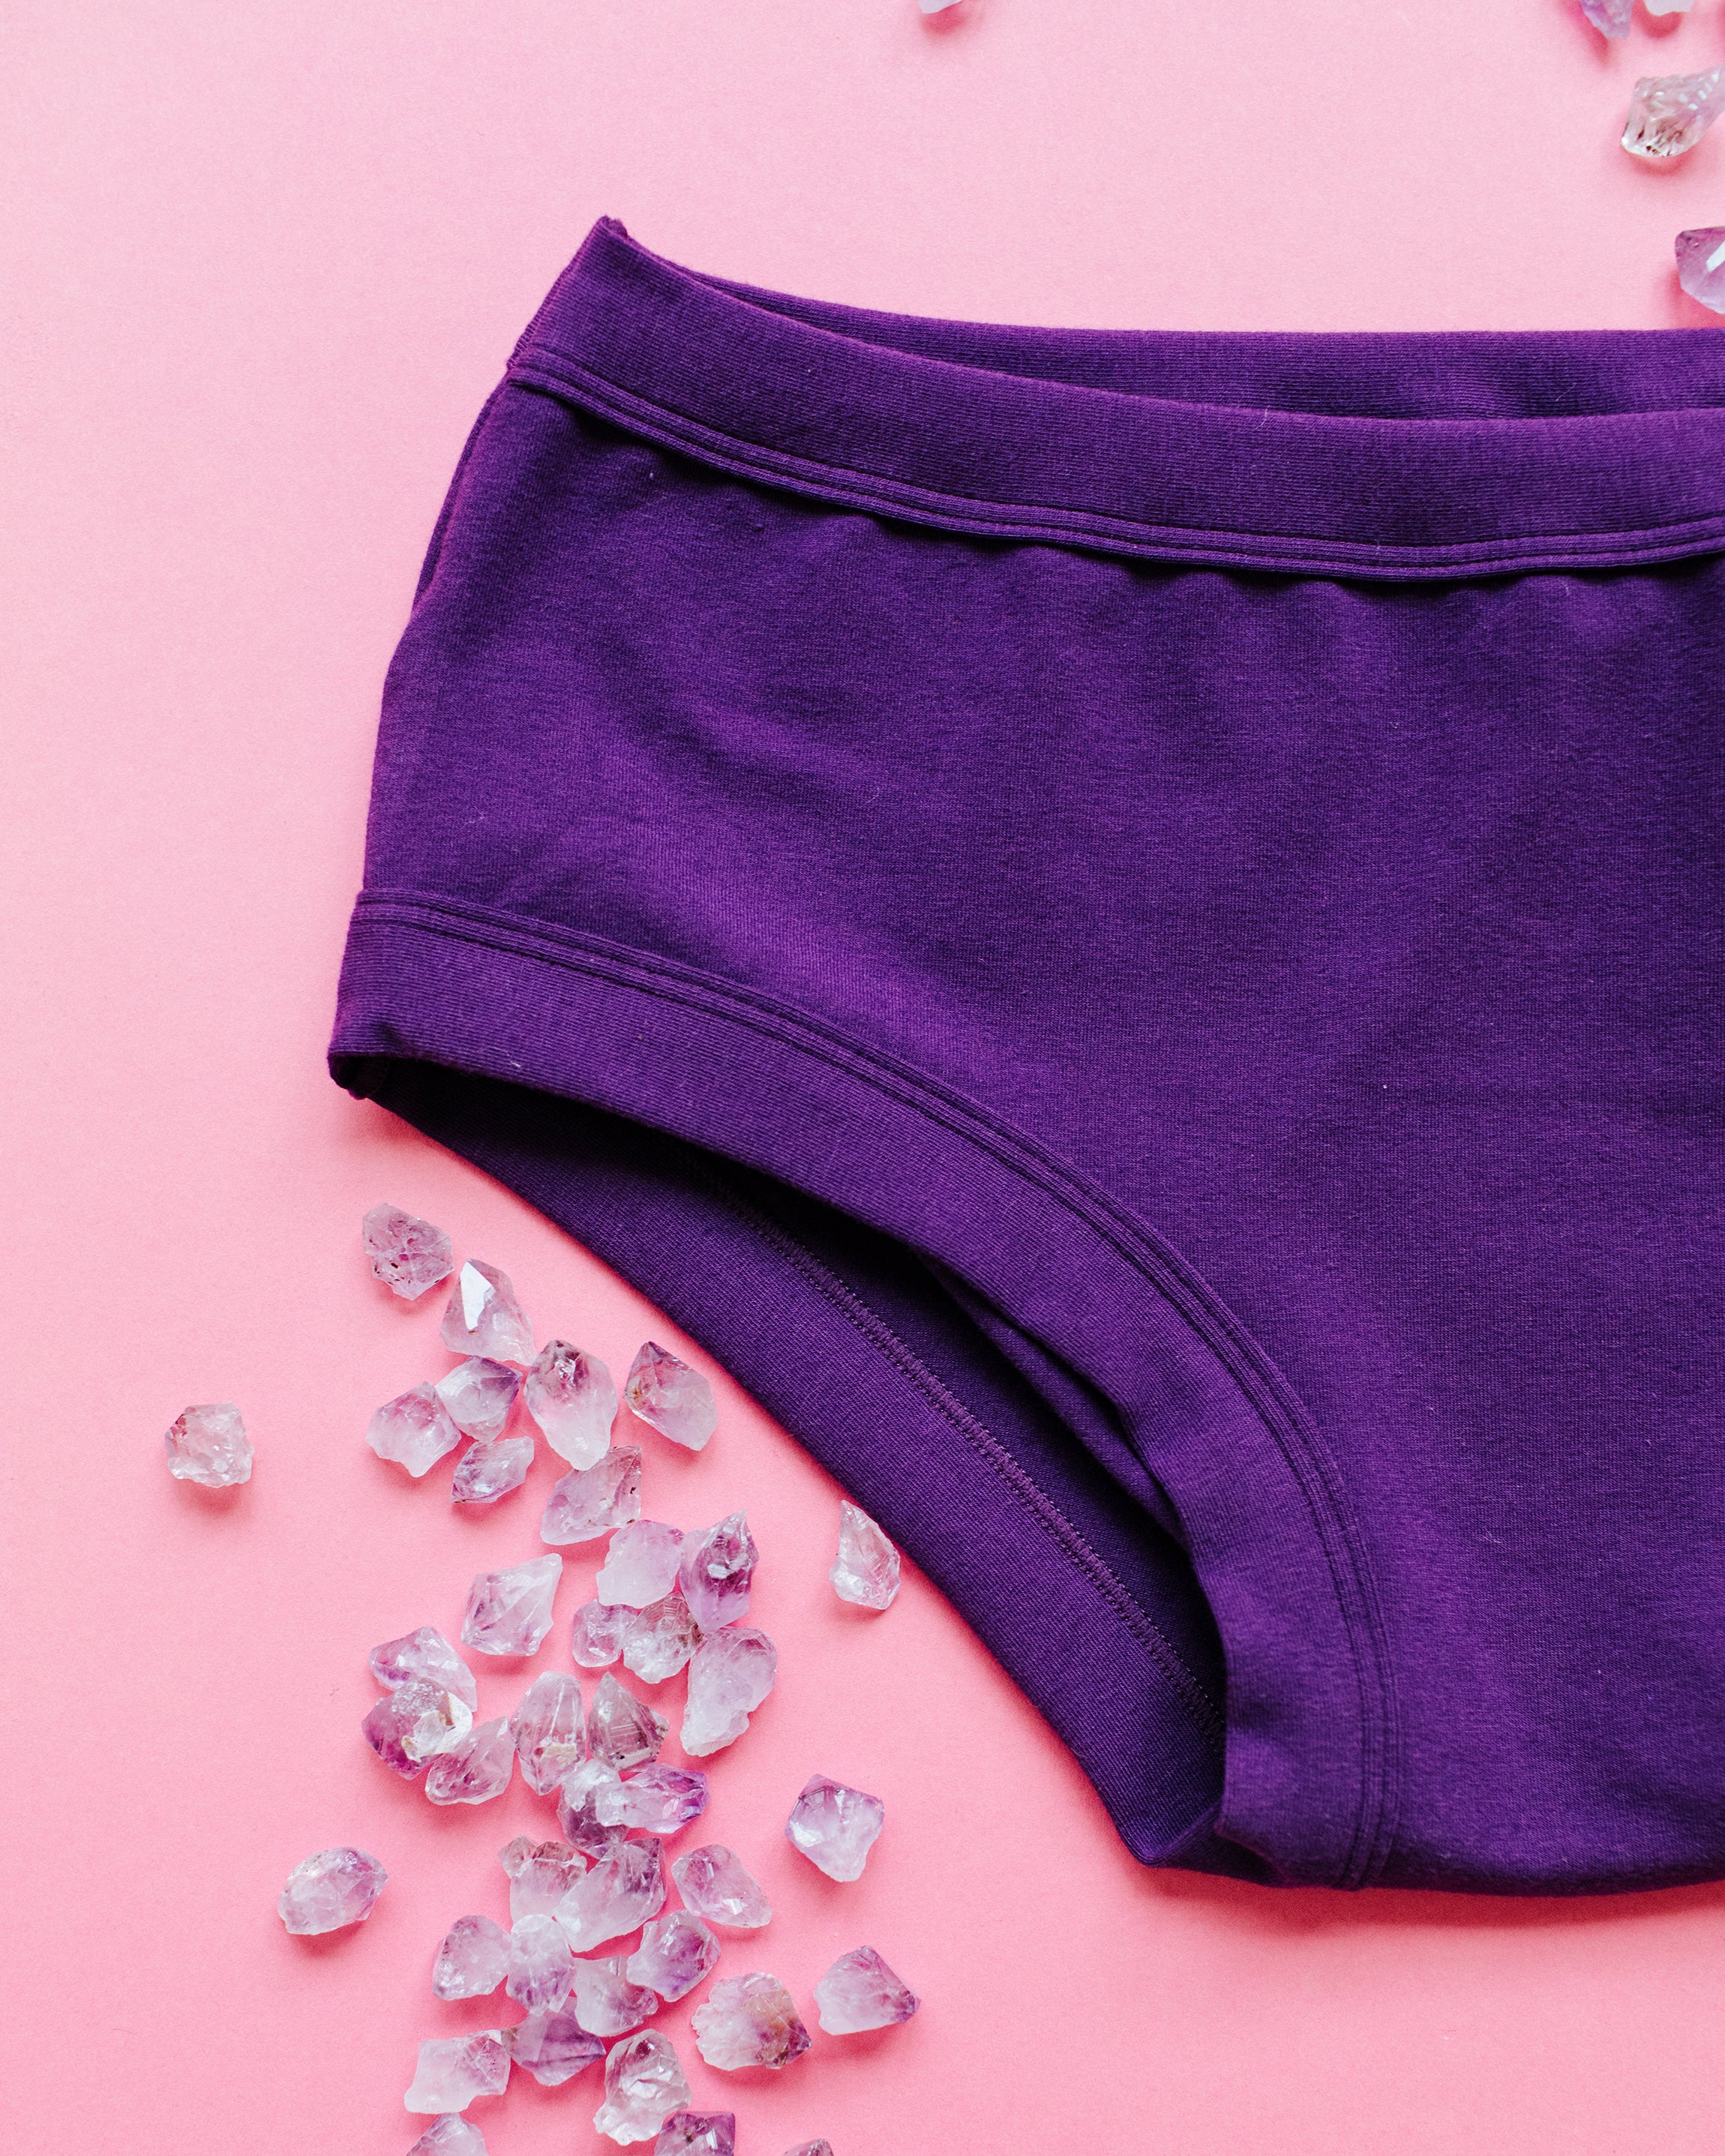 Close up flat lay of purple Deep Amethyst Hipster style underwear on a pink surface with small amethyst stones surrounding it.